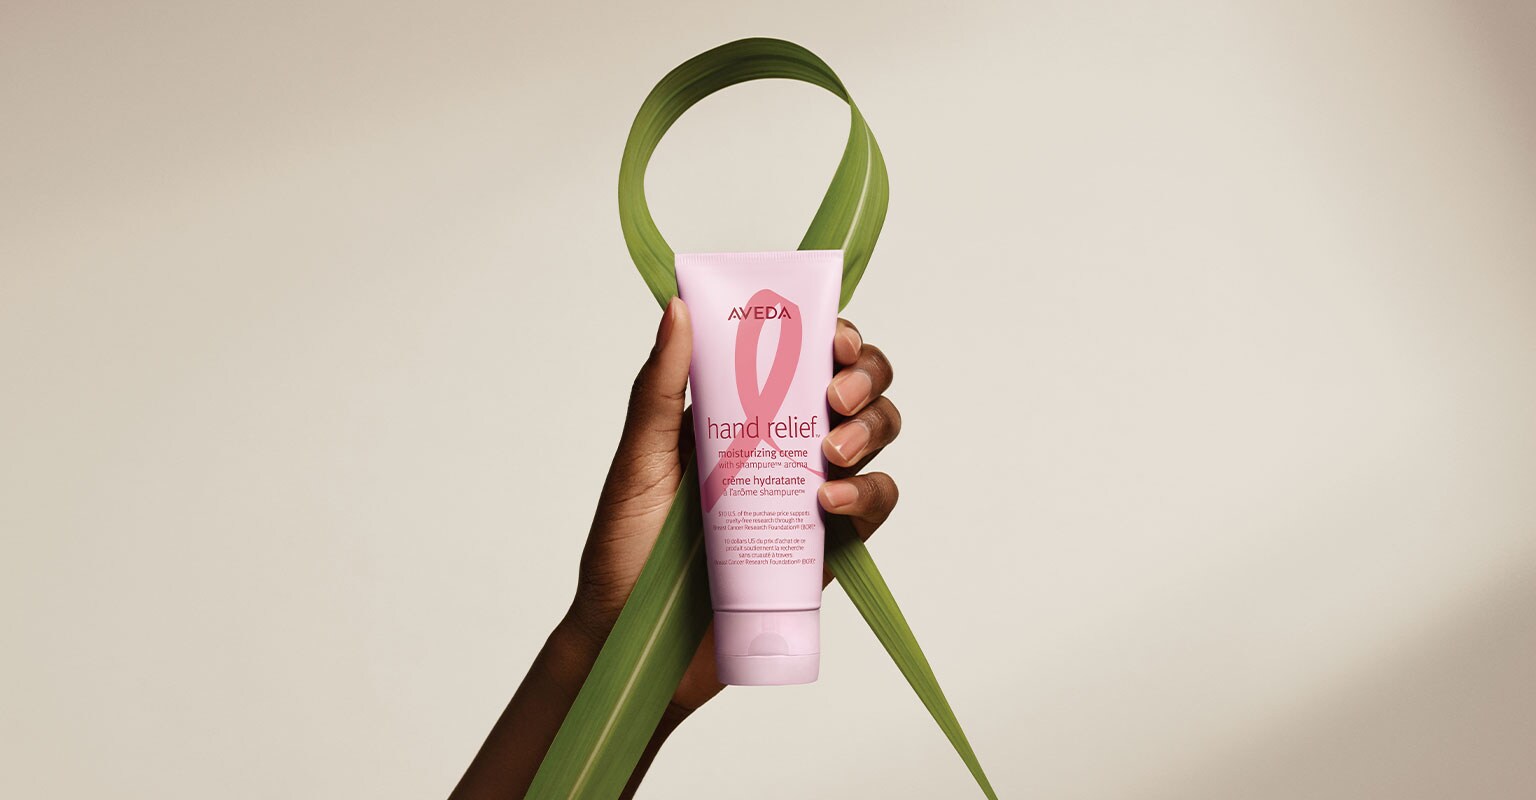 limited-edition hand relief where $10 of your purchase supports cruelty-free breast cancer research